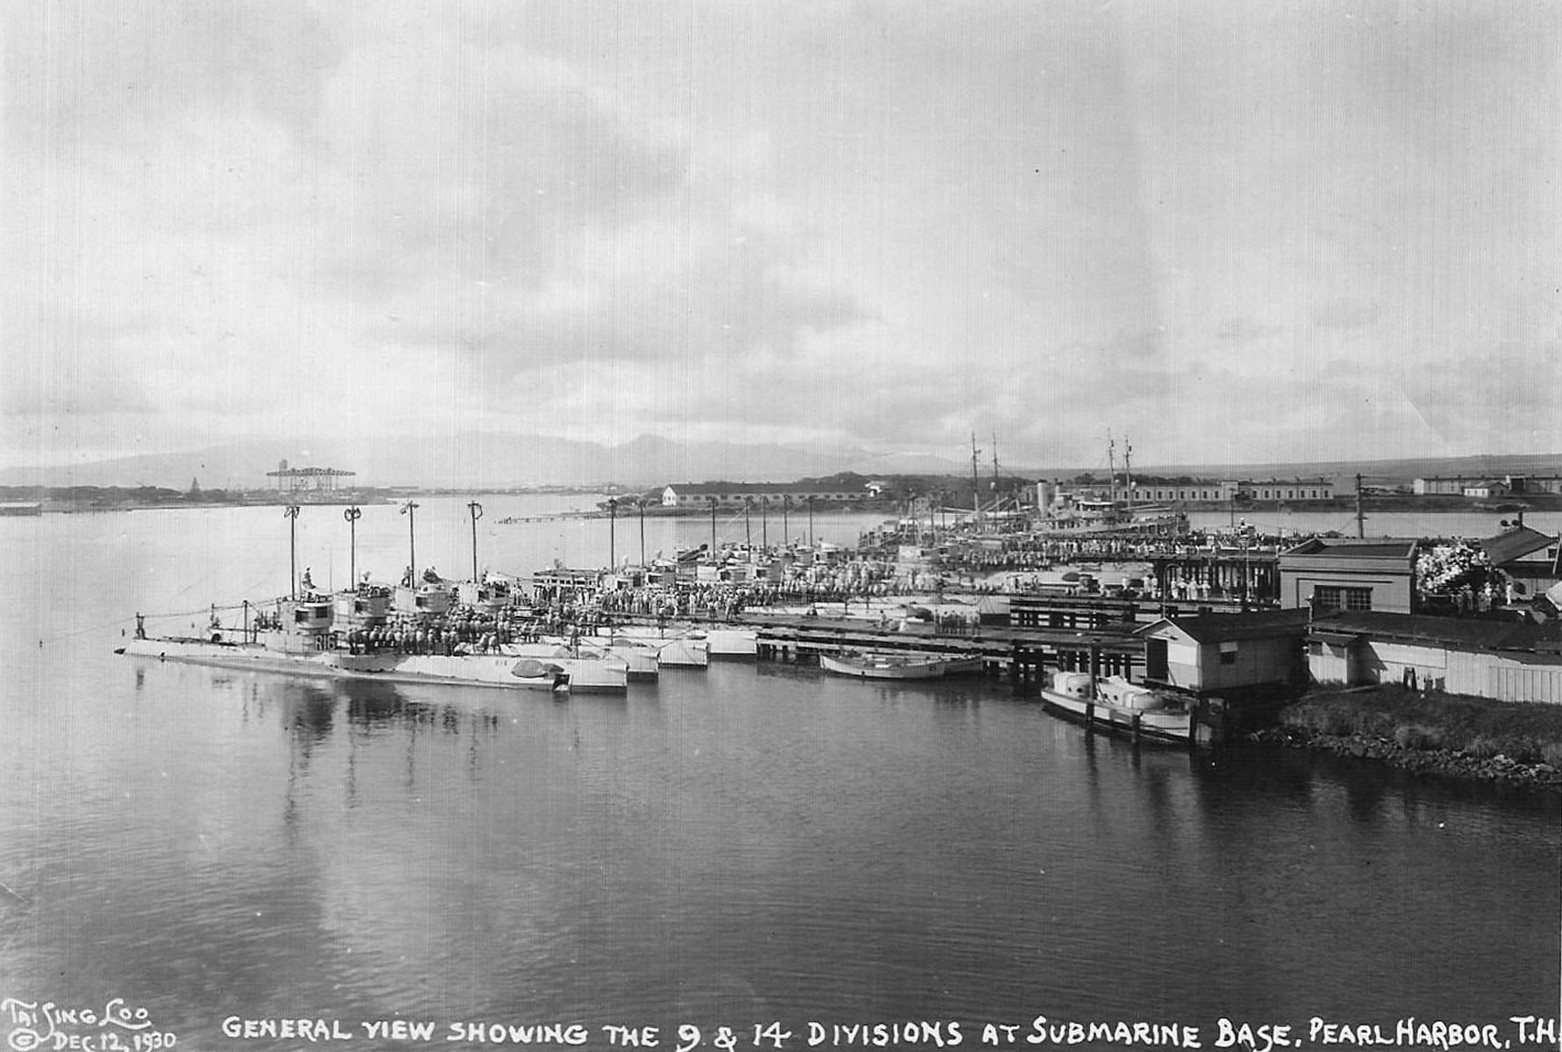 20 R-class submarines of US Navy Submarine Divisions 9 and 14 at Pearl Harbor, US Territory of Hawaii, 12 Dec 1930. Note the repair piers and floating crane YD-25 in the distance.